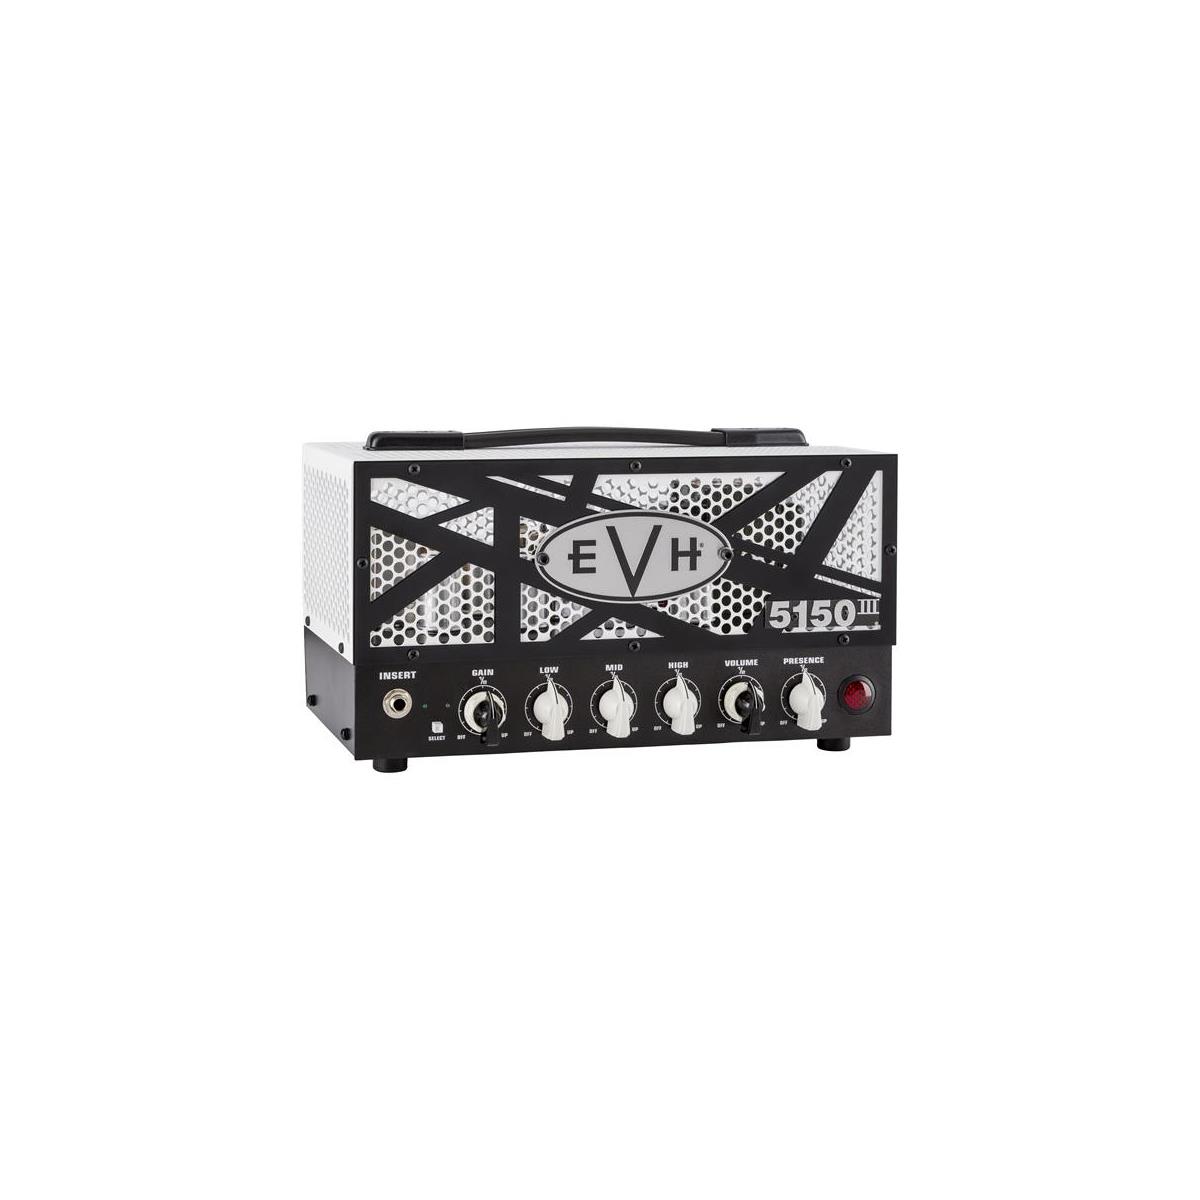 EVH 5150III LBXII 15W 2-Channel Amplifier Head, 120V The EVH 5150III LBXII is a 15-watt guitar amp head that packs an extraordinary and powerful punch. This 2.0 version of their diminutive easy-to-carry "lunchbox" head features the famous Green and Blue channels, delivering sparkling clean tone and punchy gain to inspire unlimited artistic expression. Armed with four ECC83S (12AX7) preamp and two EL84 power tubes, the LBXII also includes dual-concentric gain and volume controls for precise and independent control of each channel, as well as shared EQ presence and resonance controls. Dial in a crystal clean tone or turn the gain up for a bluesier counterpart on the Green channel and when you are looking to bring the house down, hit the one-button footswitch and select the Blue channel for a tight and compressed overdriven tone with sustain for days. Bedroom players can utilize the 1/4-power switch to reduce the head to 3.5 watts and avoid disturbing the rest of the household, while studio and live musicians can leverage this same feature to turn up the head for a squeezed and spongy tone. Boasting exceptional construction, fierce tone and distinctive style with a black control panel and white metal grill cage with iconic EVH striped motif, the LBXII is a phenomenal performing amp.